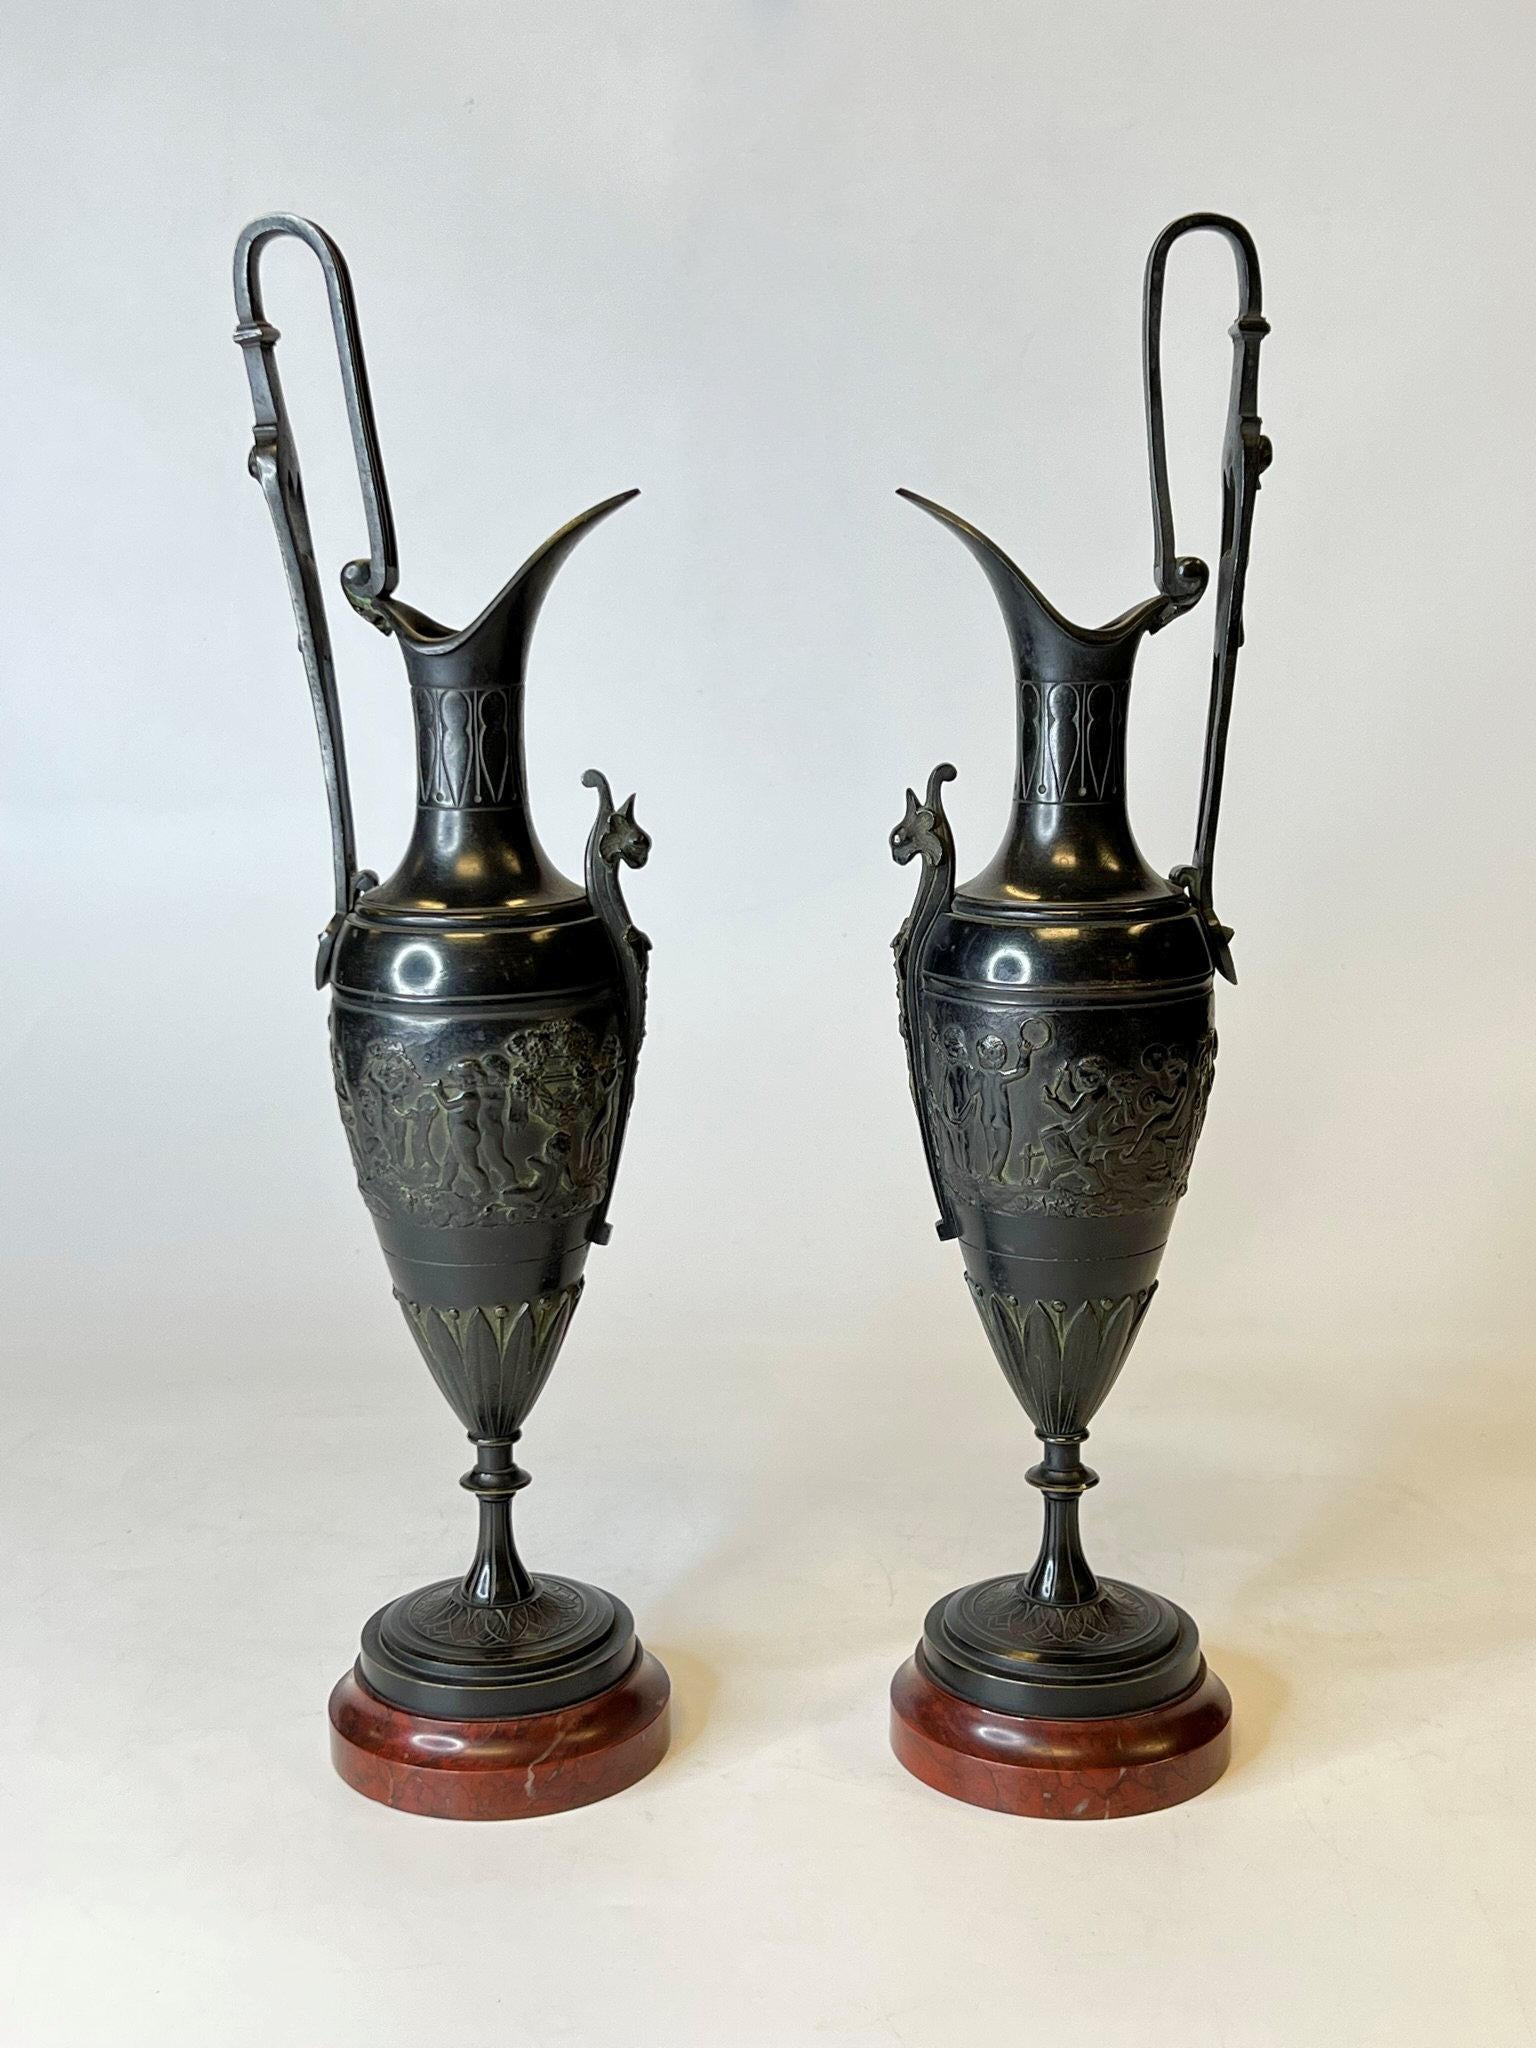 Pair of 19th century patinated bronze ewers of the finest quality in the Roman or Greco-Roman style depicting frolicking cherubs (putti) in a Bacchanal scene, likely of Italian or possibly French origin. 